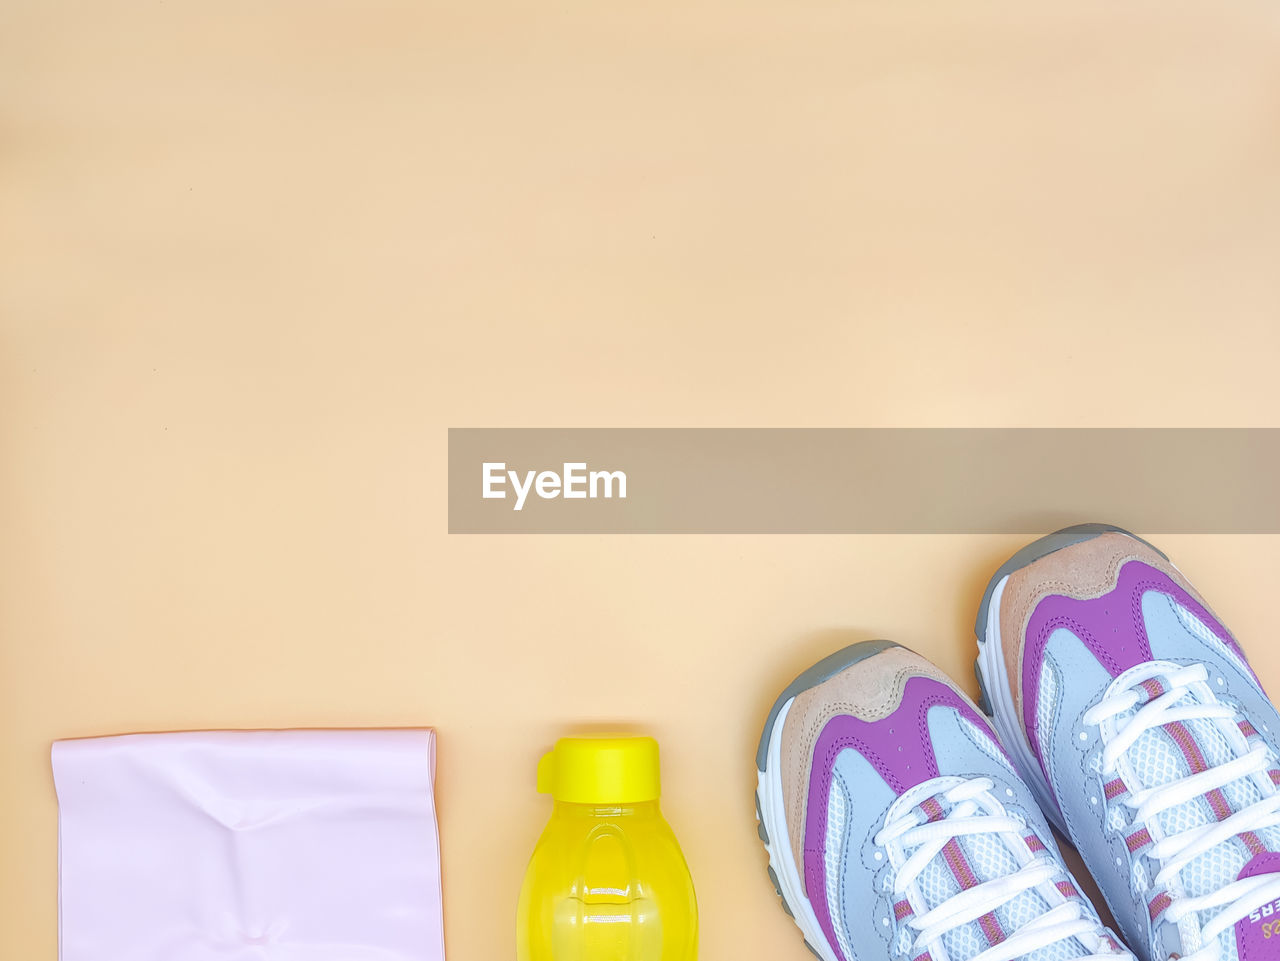 Set stylish sneakers, fitness rubber band stretch, yellow bottle on the beige background